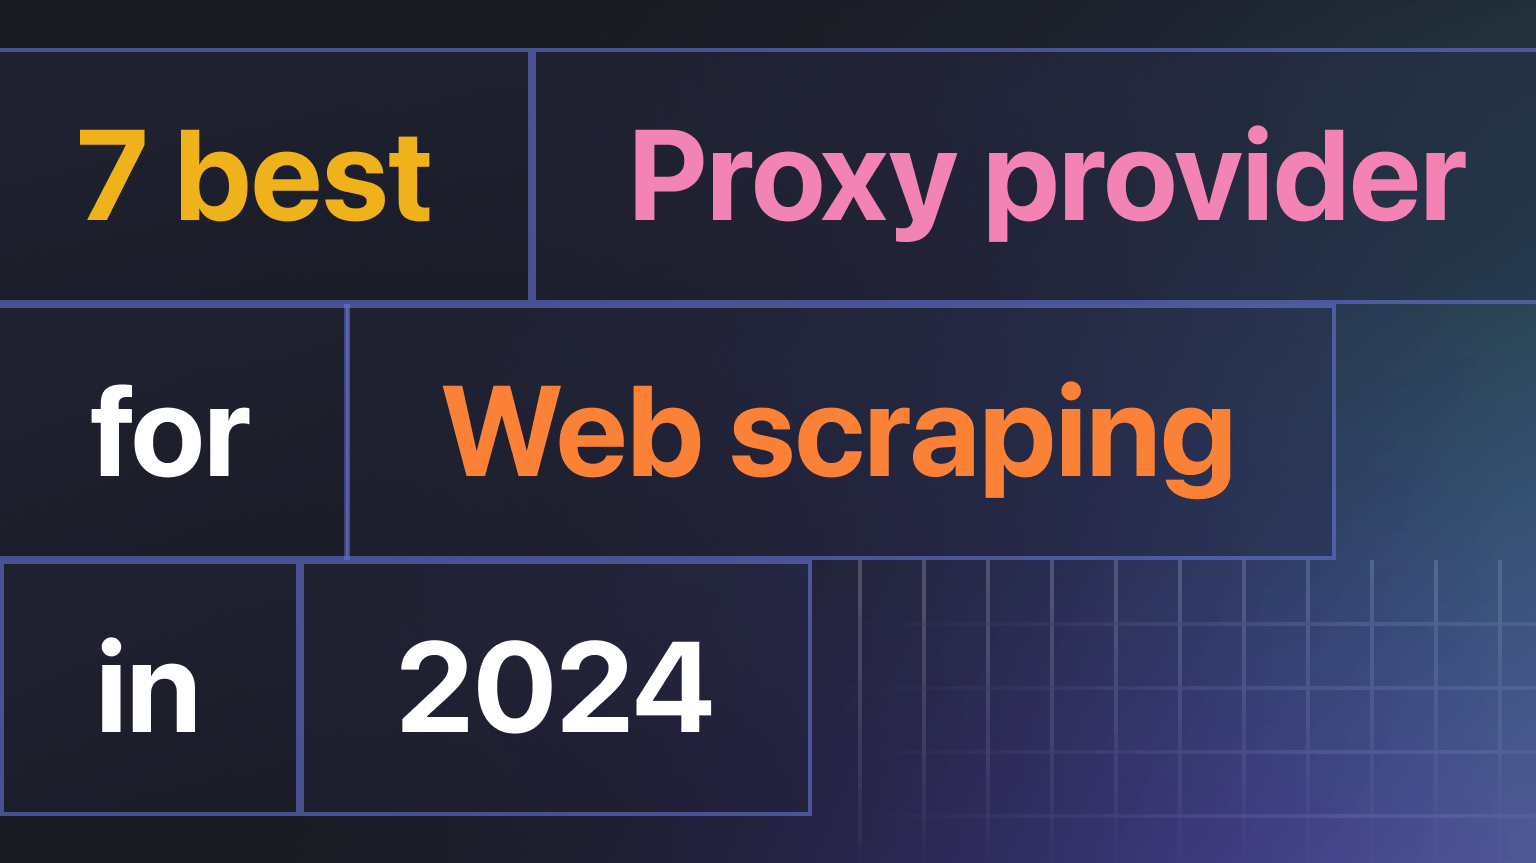 The 7 best proxy providers for web scraping in 2024